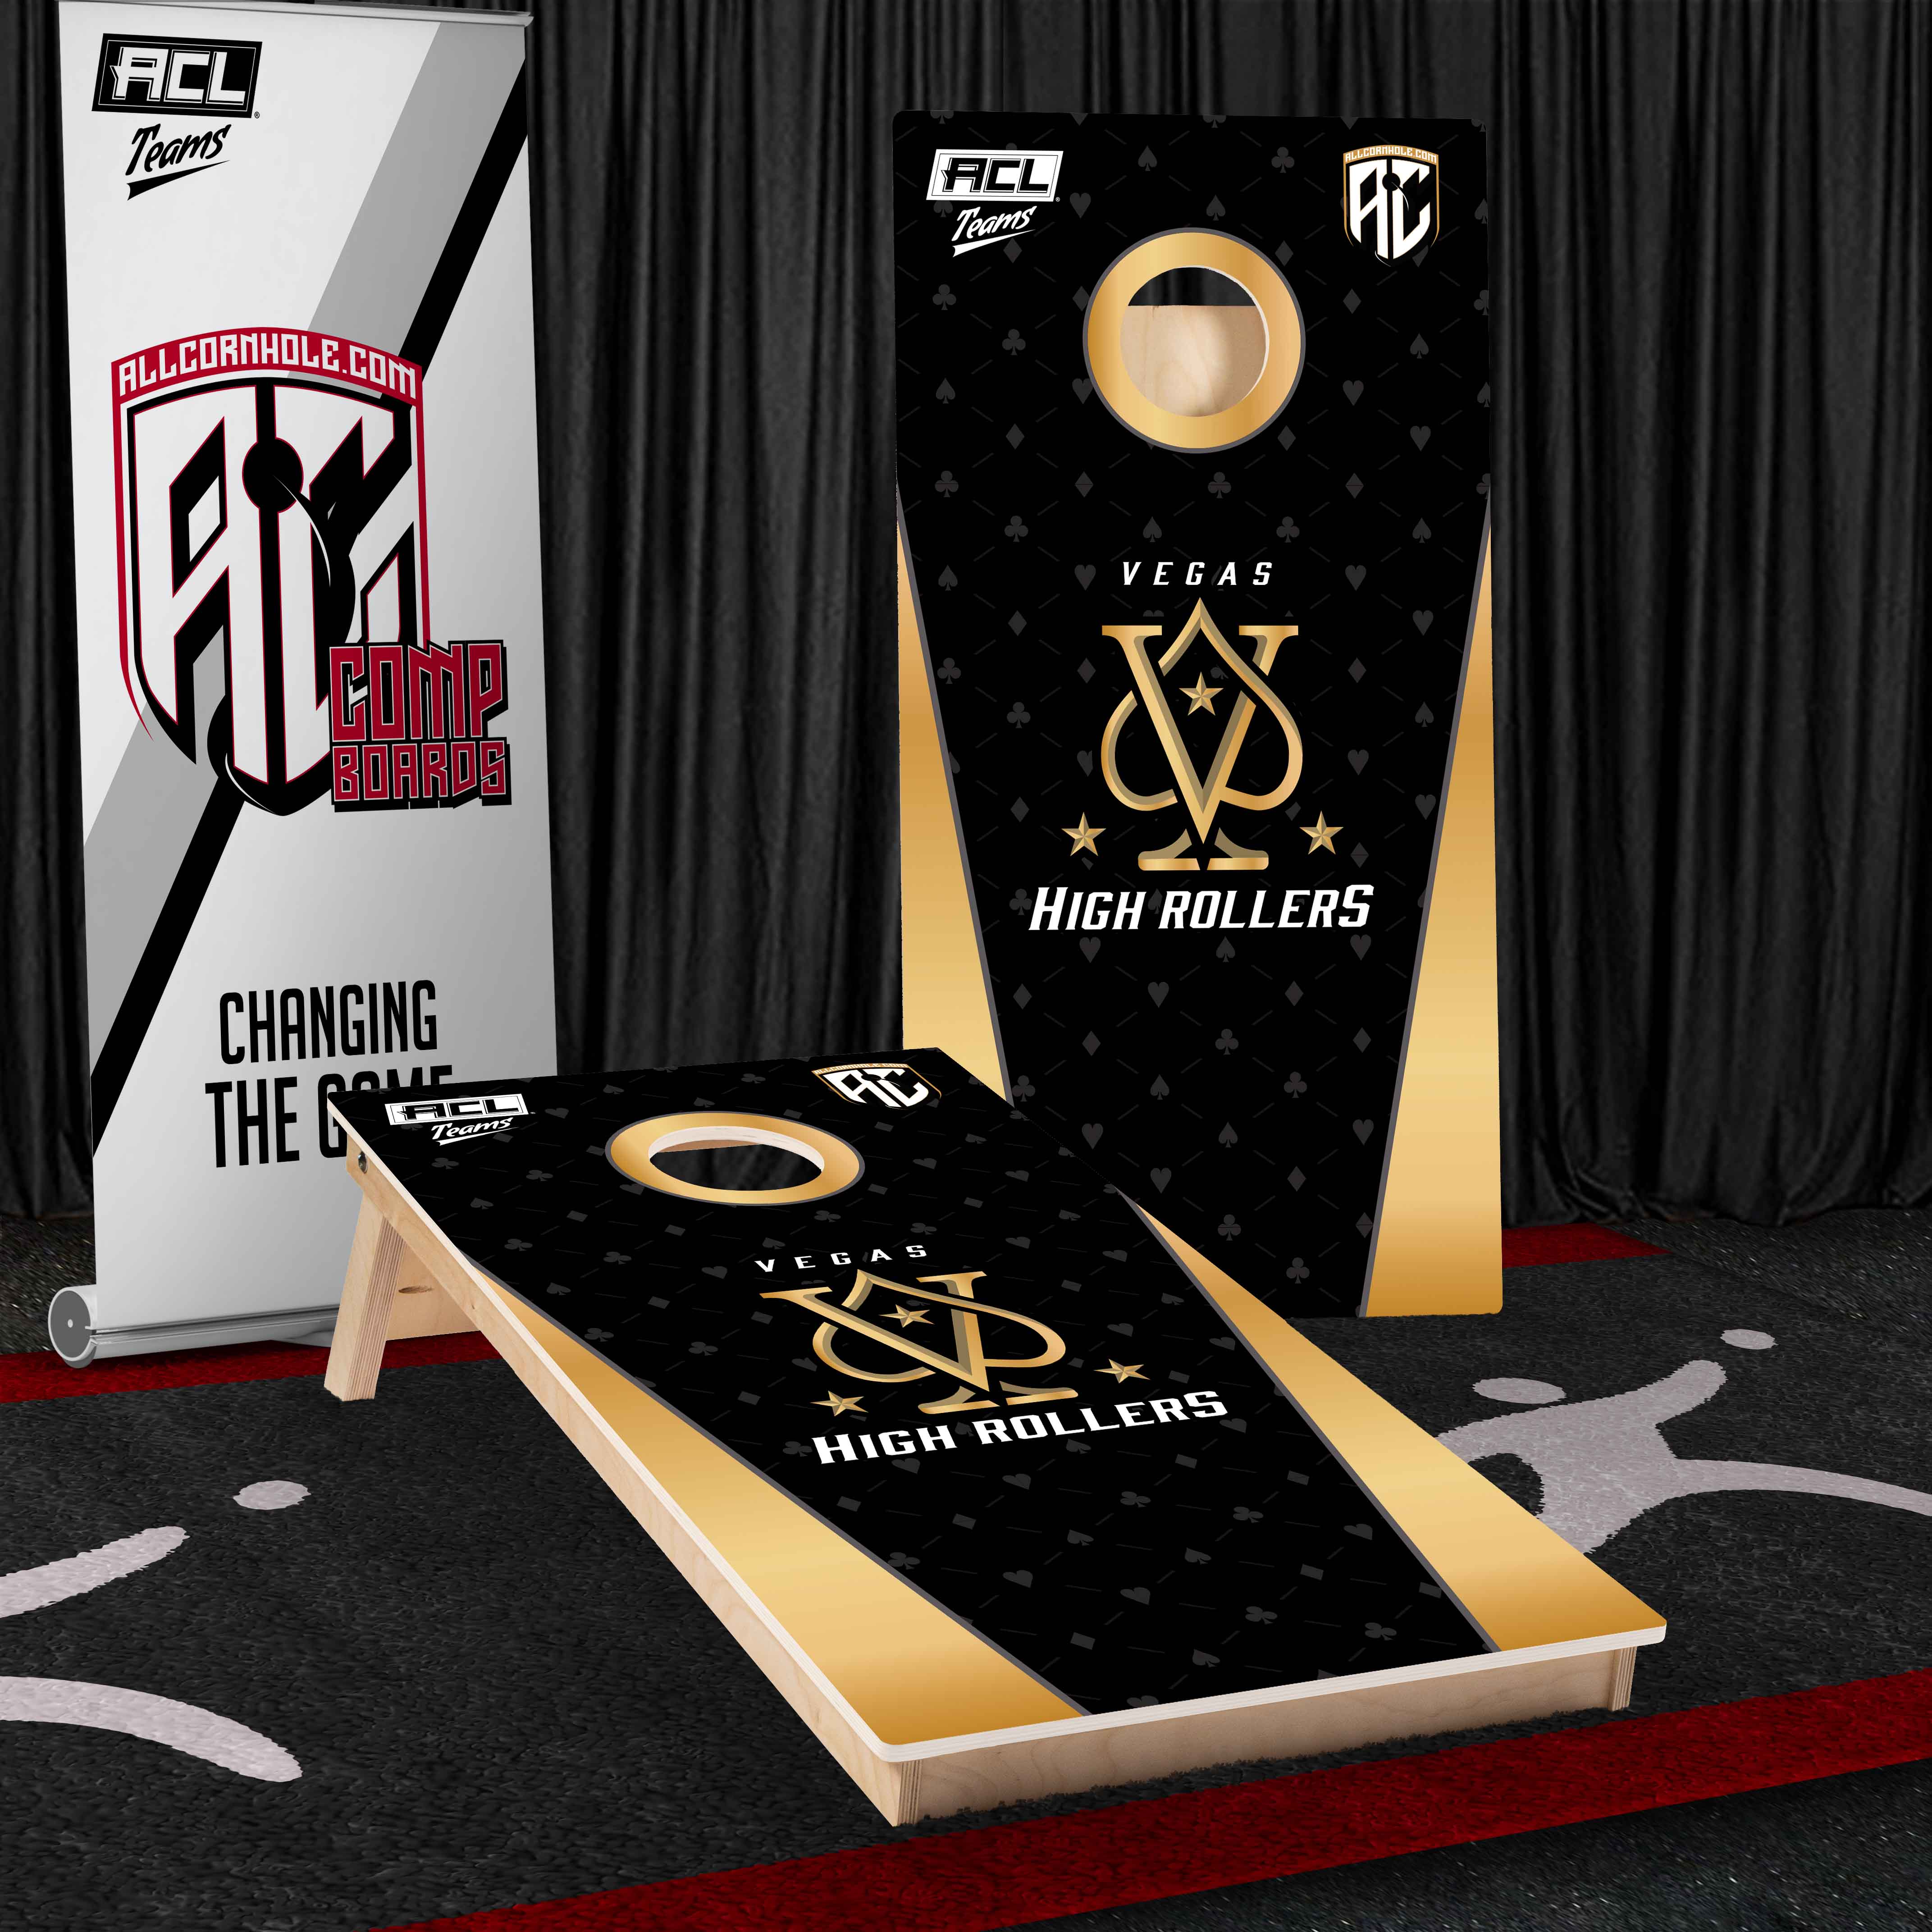 ACL Teams Competitive Cornhole Board - Vegas High Rollers